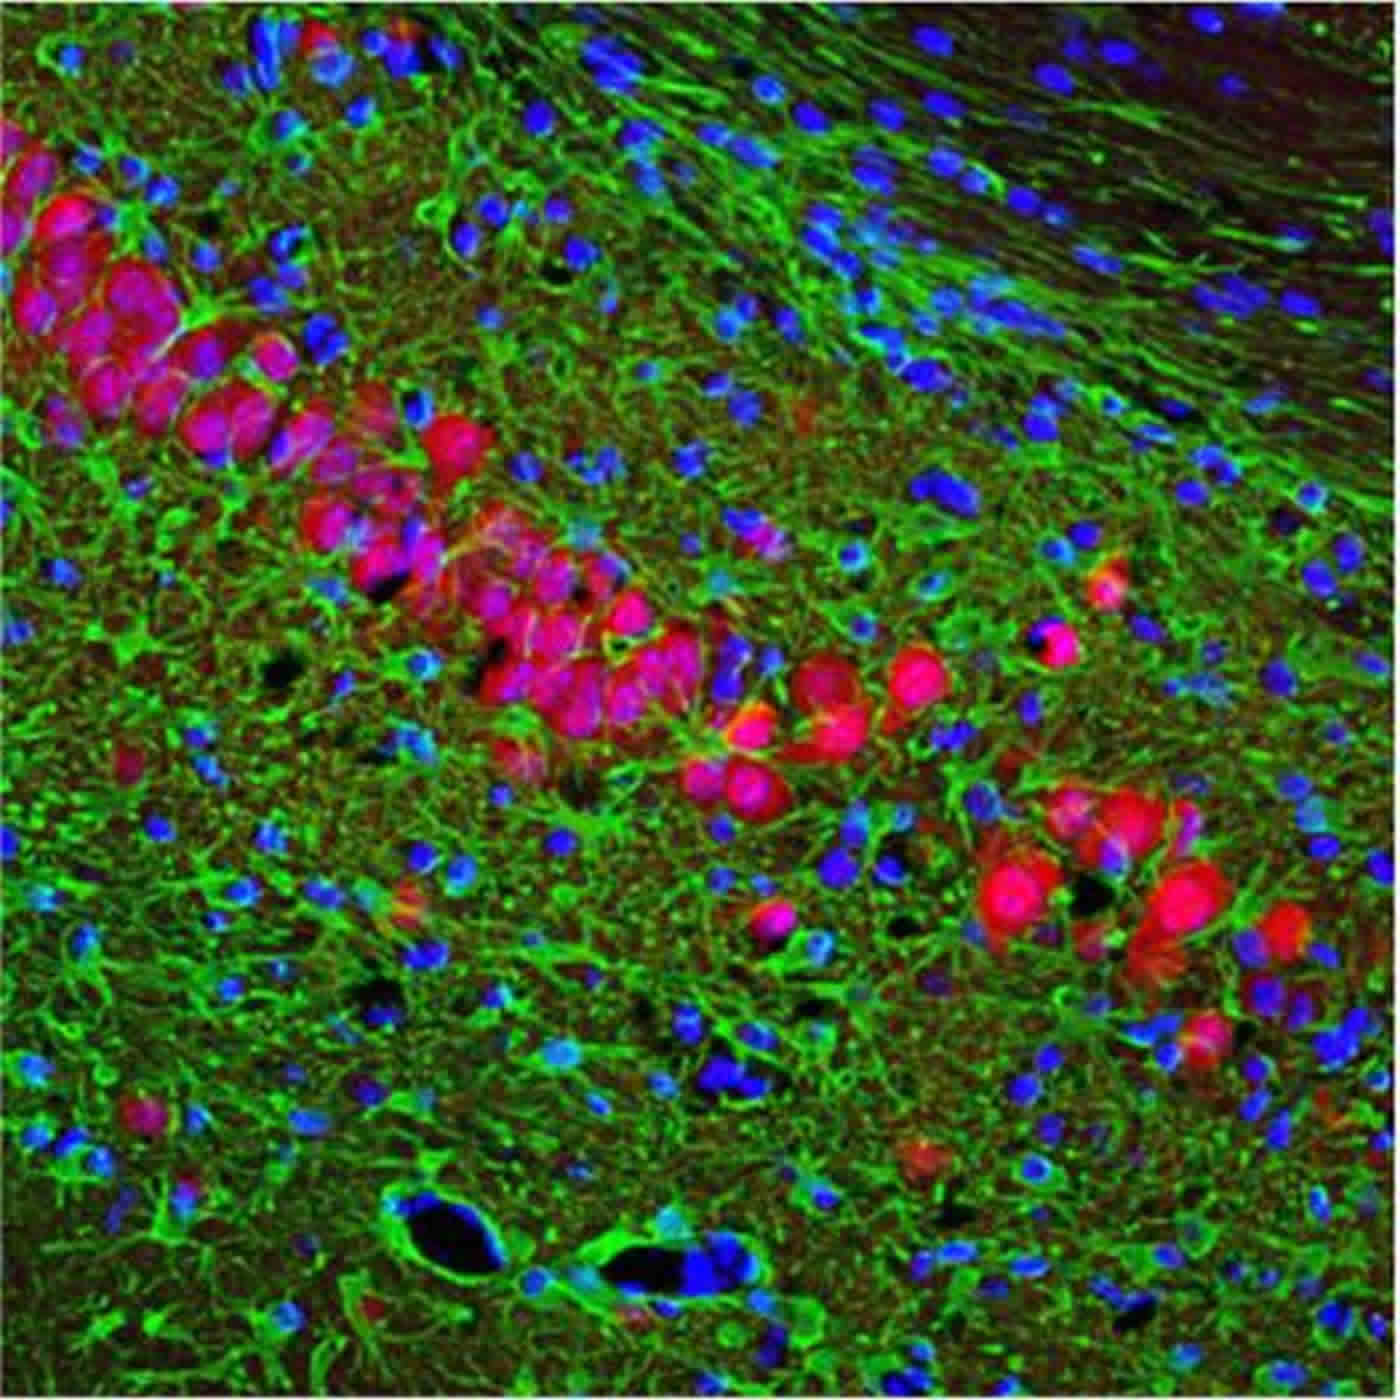 Image shows dying neurons in the hippocampus.